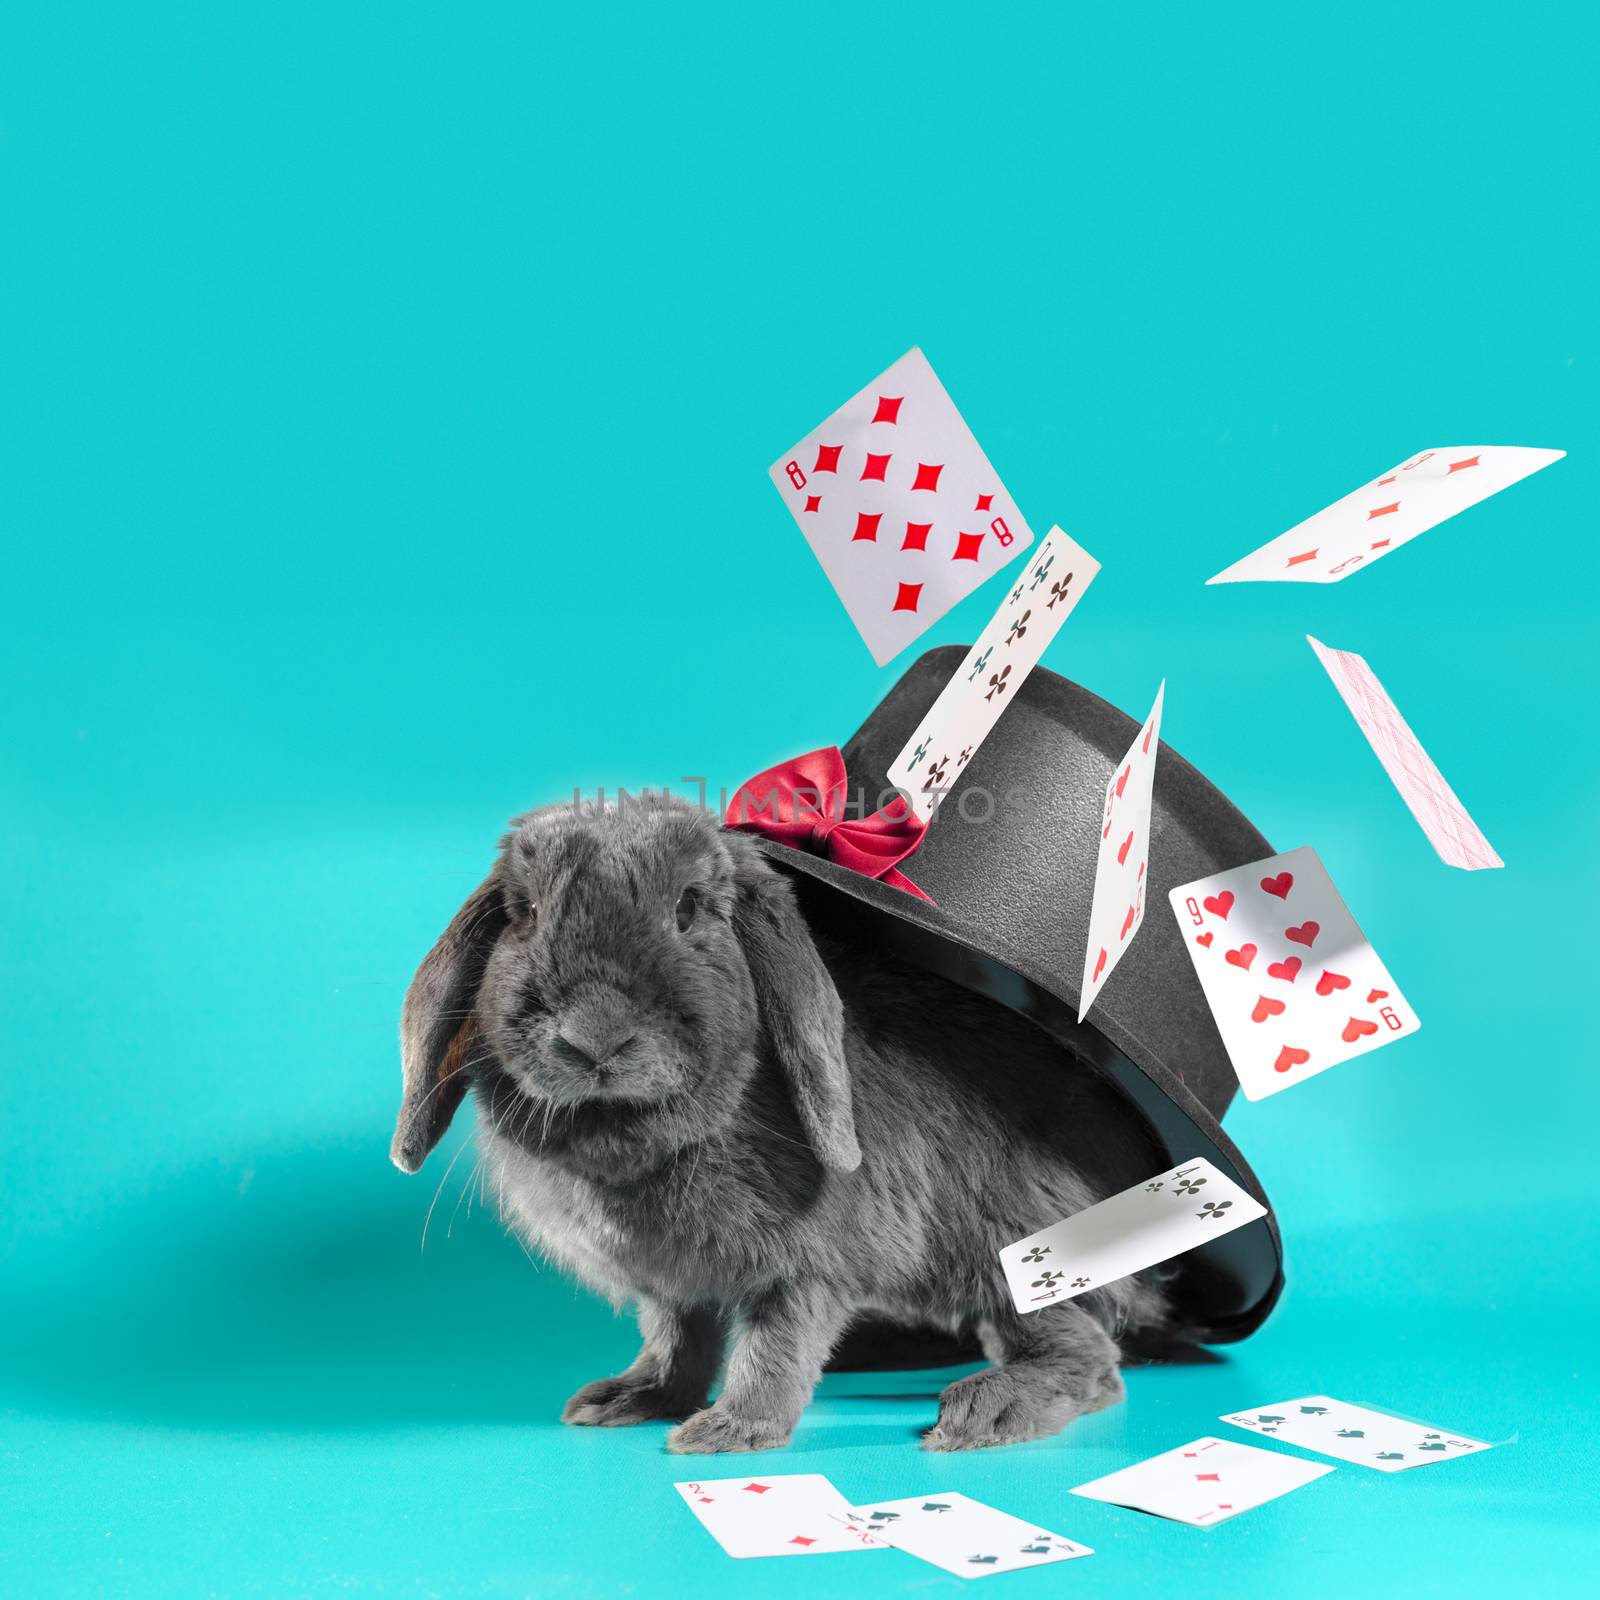 gray dwarf rabbit under a hat with a cylinder and flying cards on a turquoise background